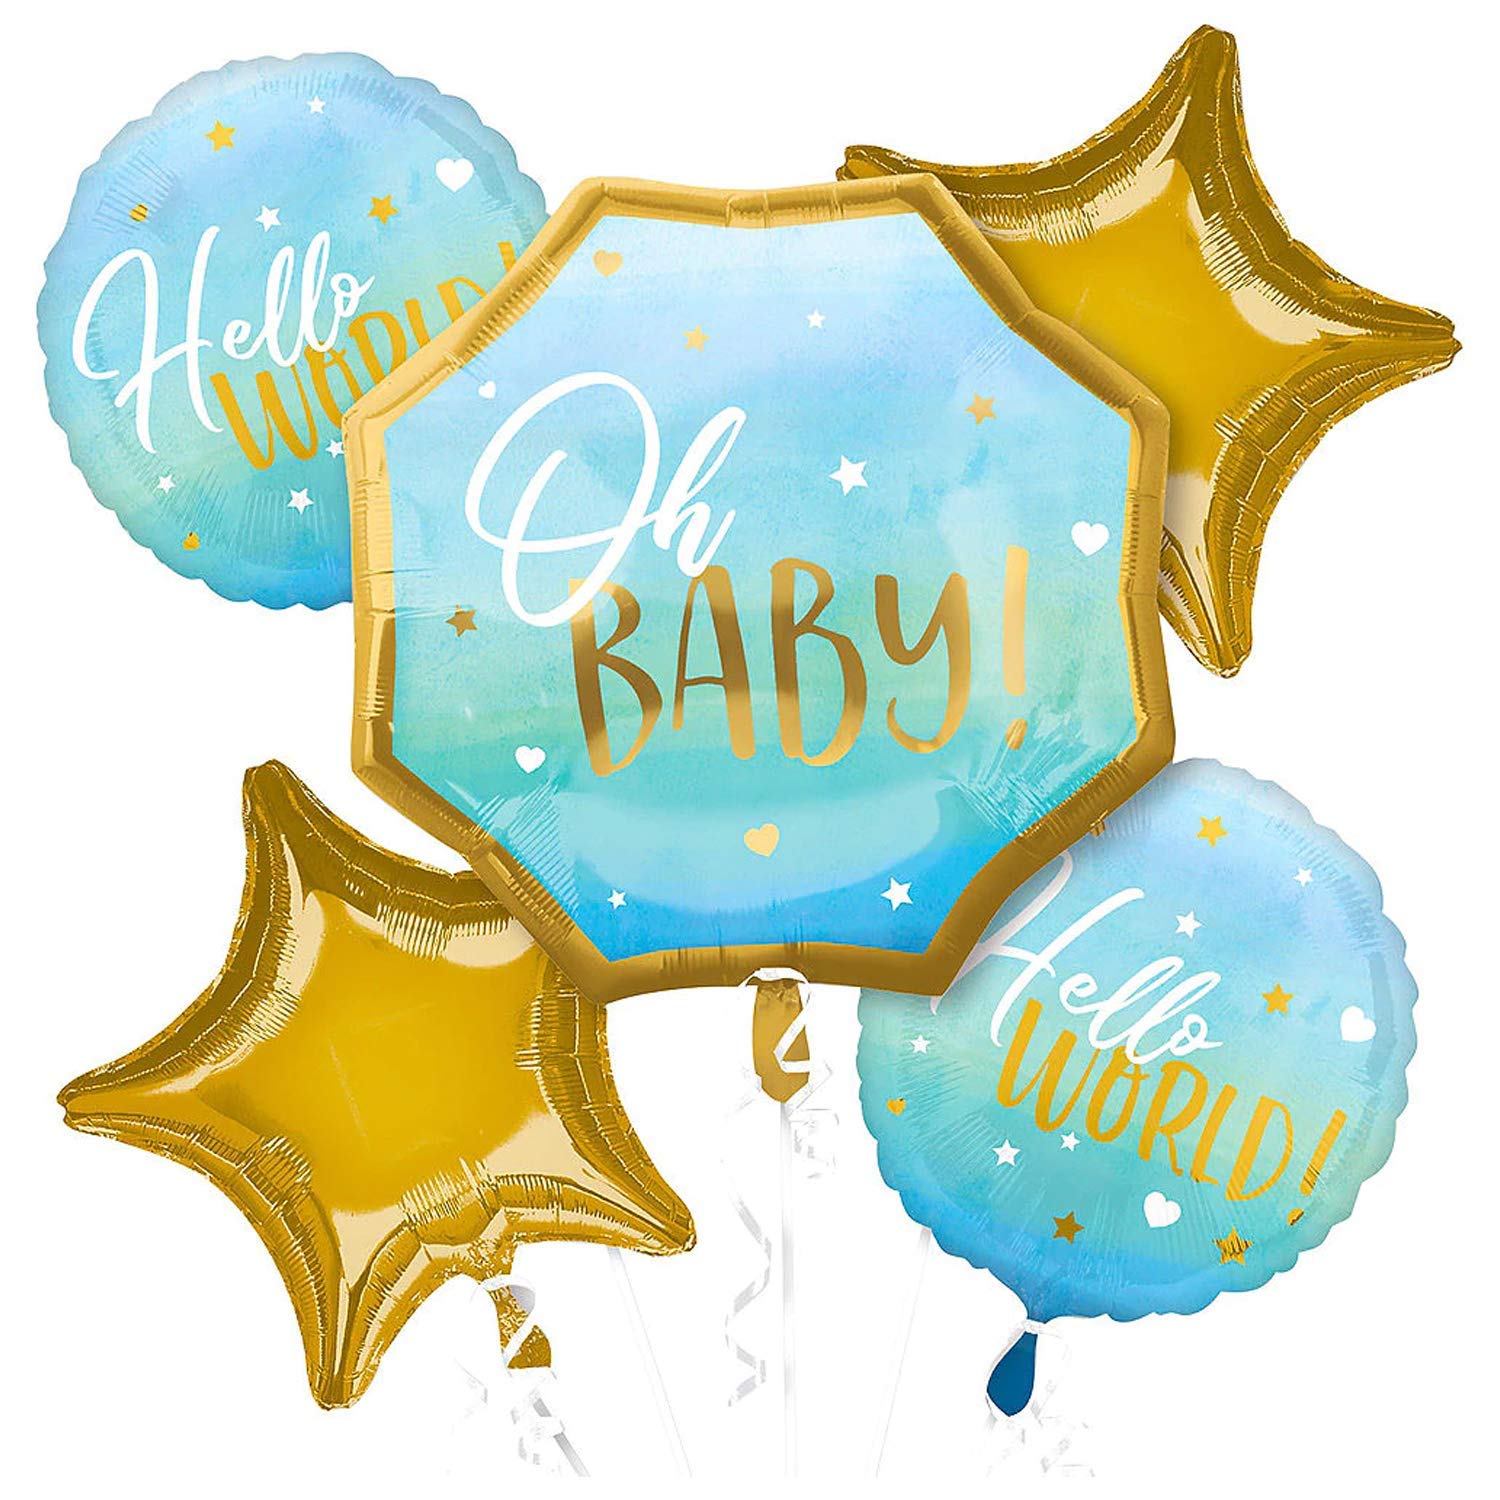 Oh Baby Blue Foil Balloon Hello World Welcome New Born Baby Decorative Foil Balloon Set of 5